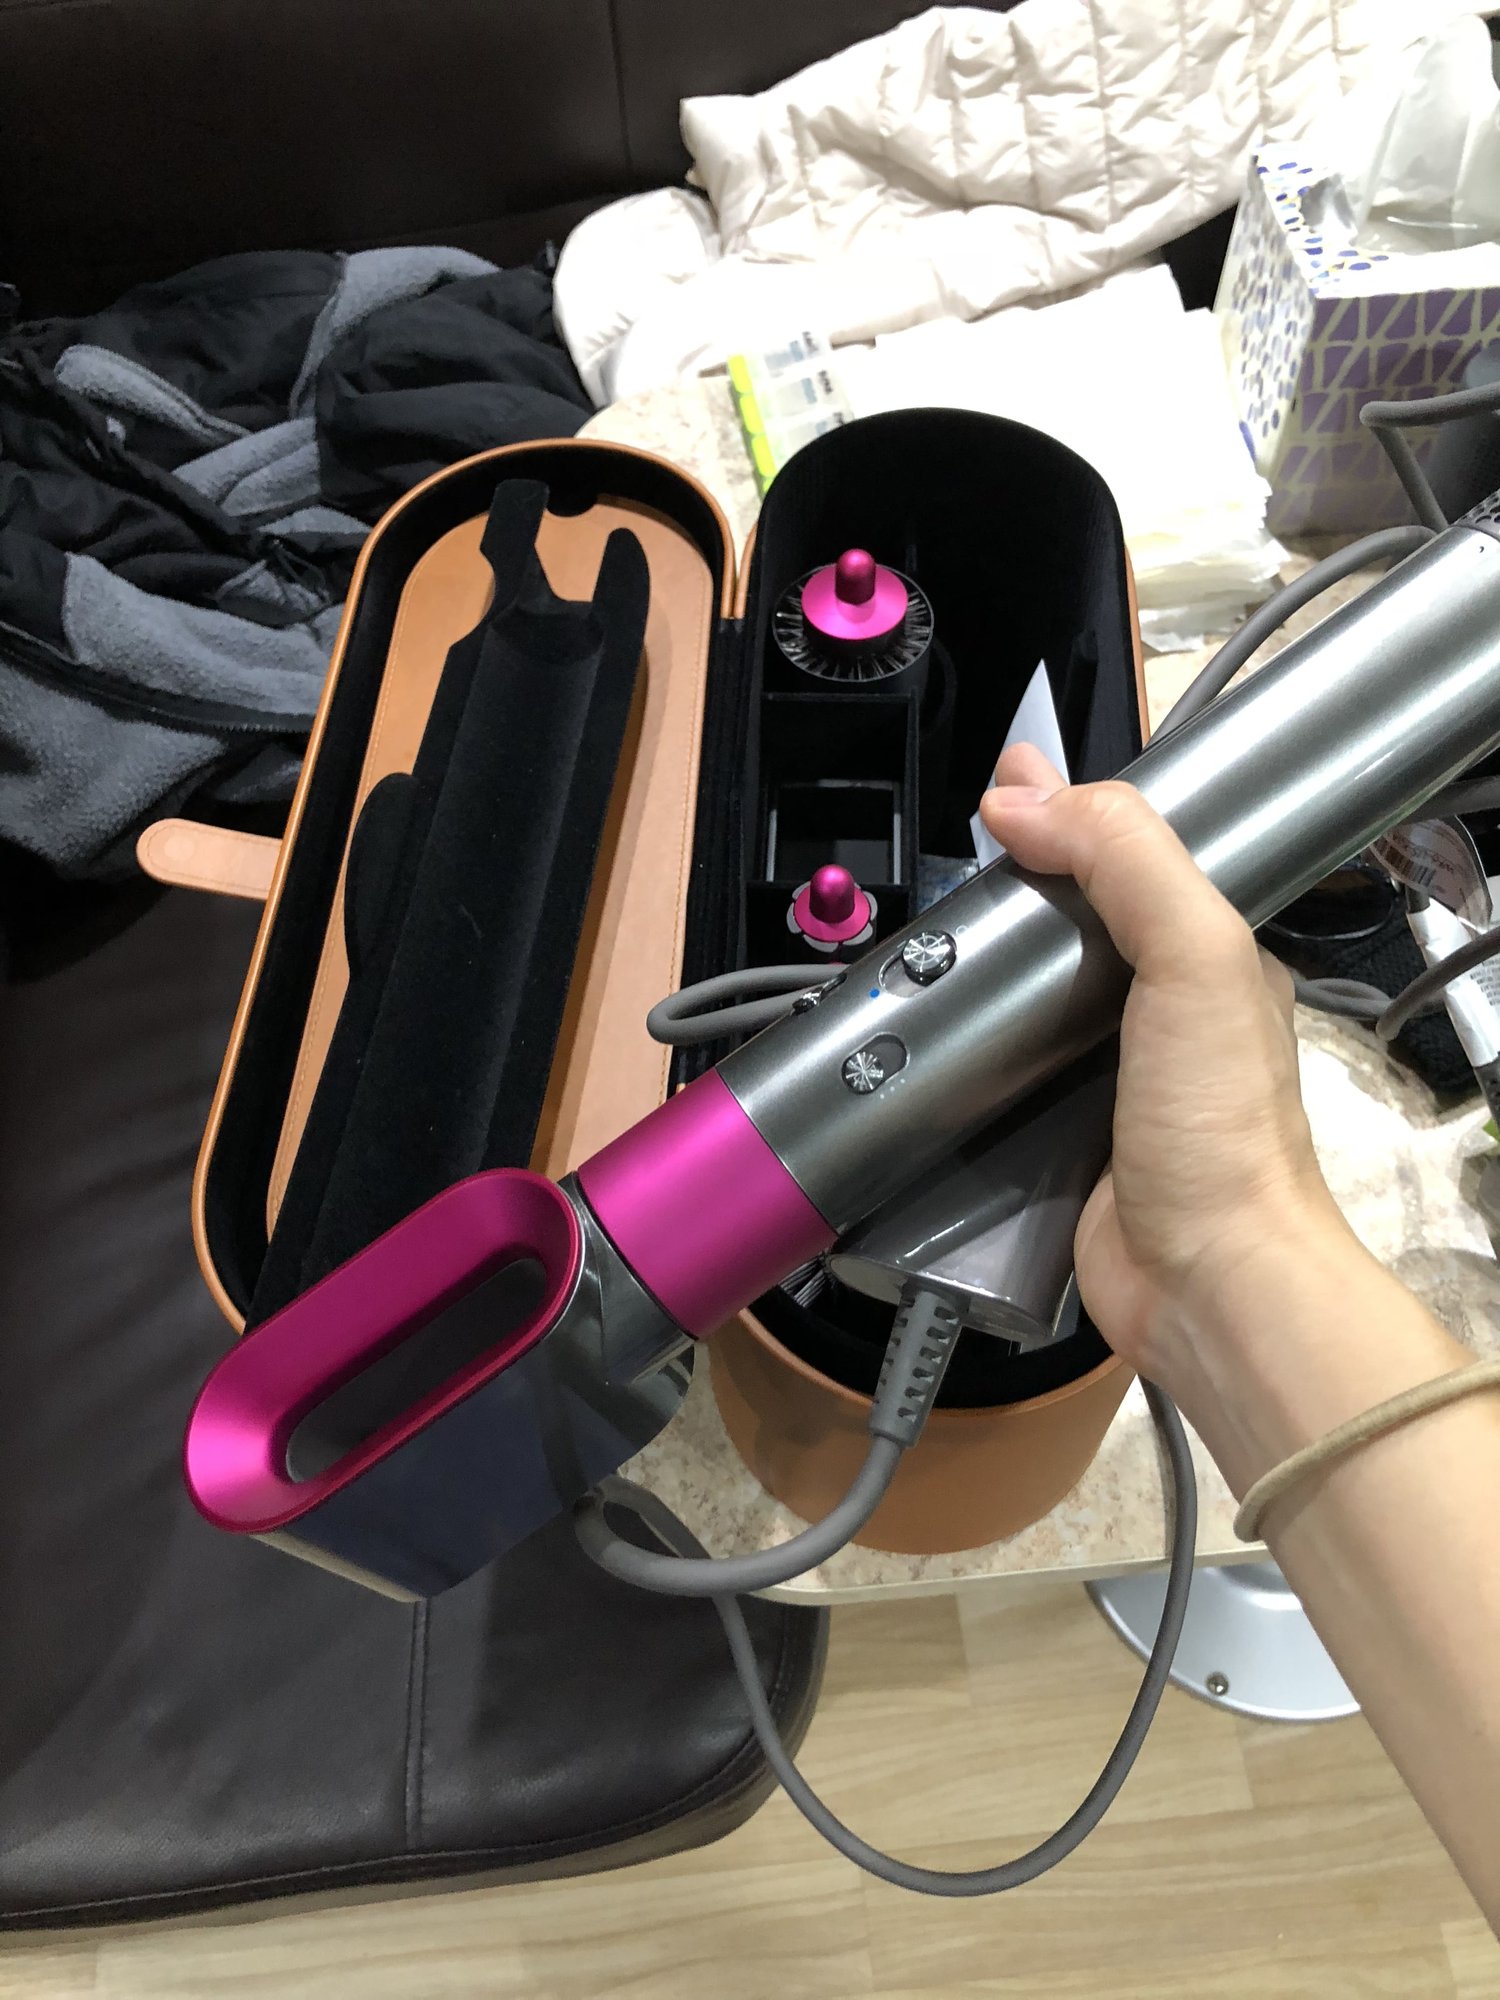 Unsponsored Dyson Airwrap Styler Review - Temporary-House Wifey.